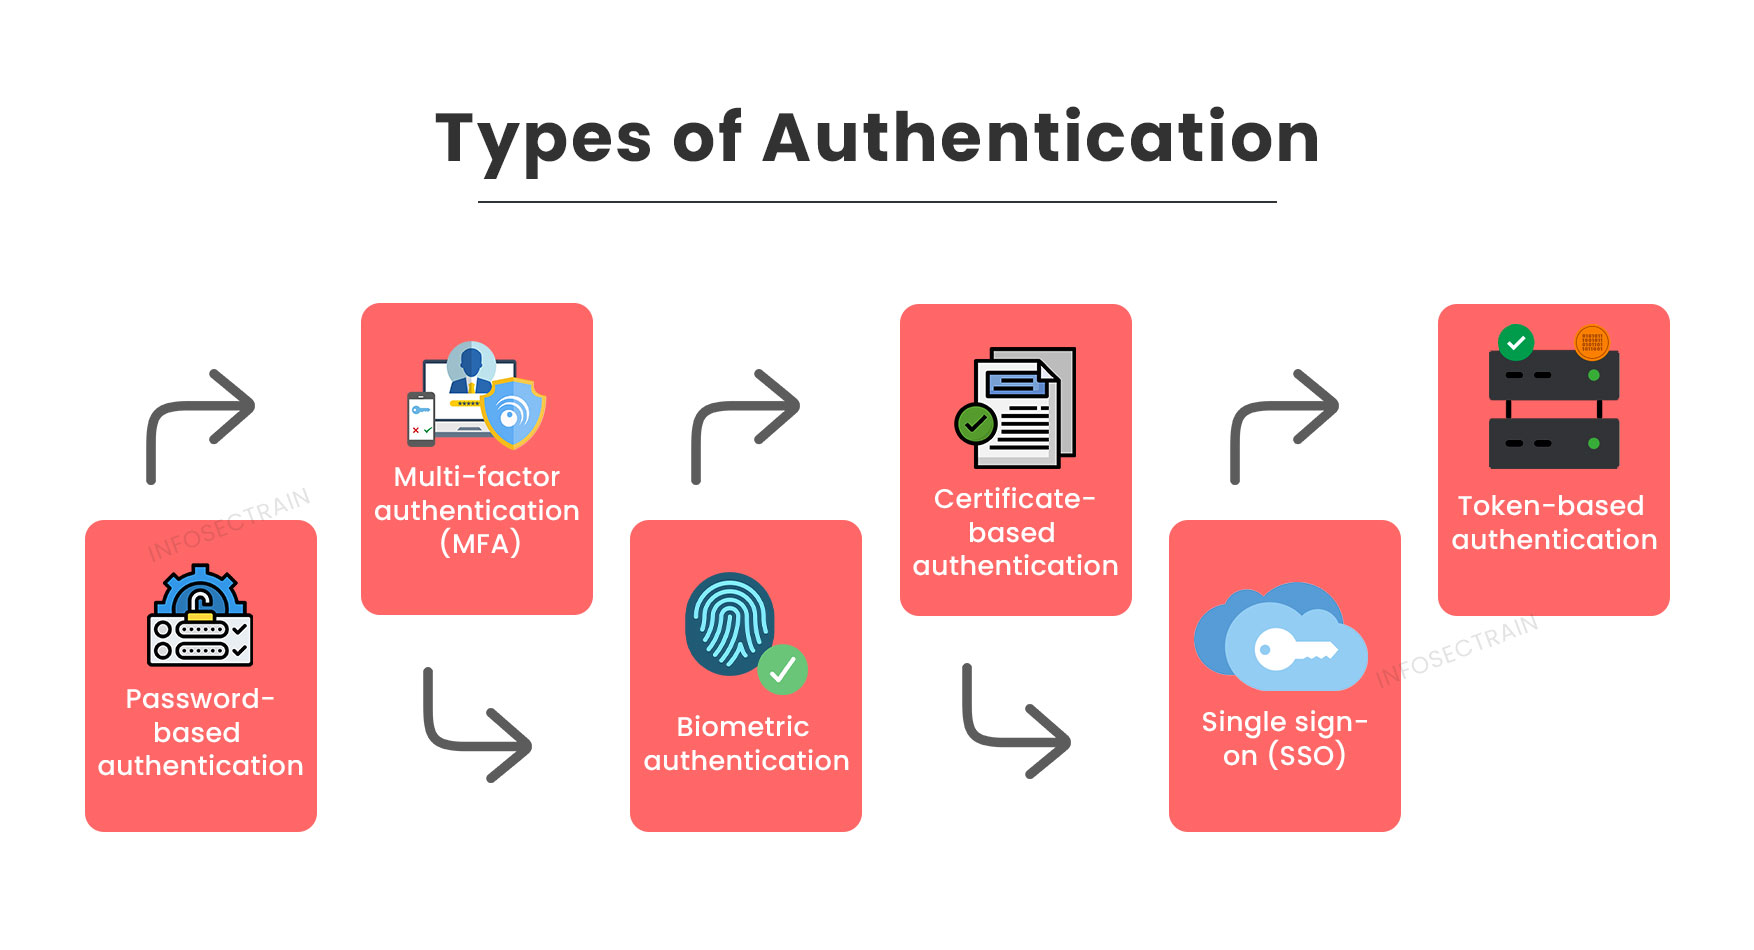 Types of Cybersecurity - Authentication and authorization